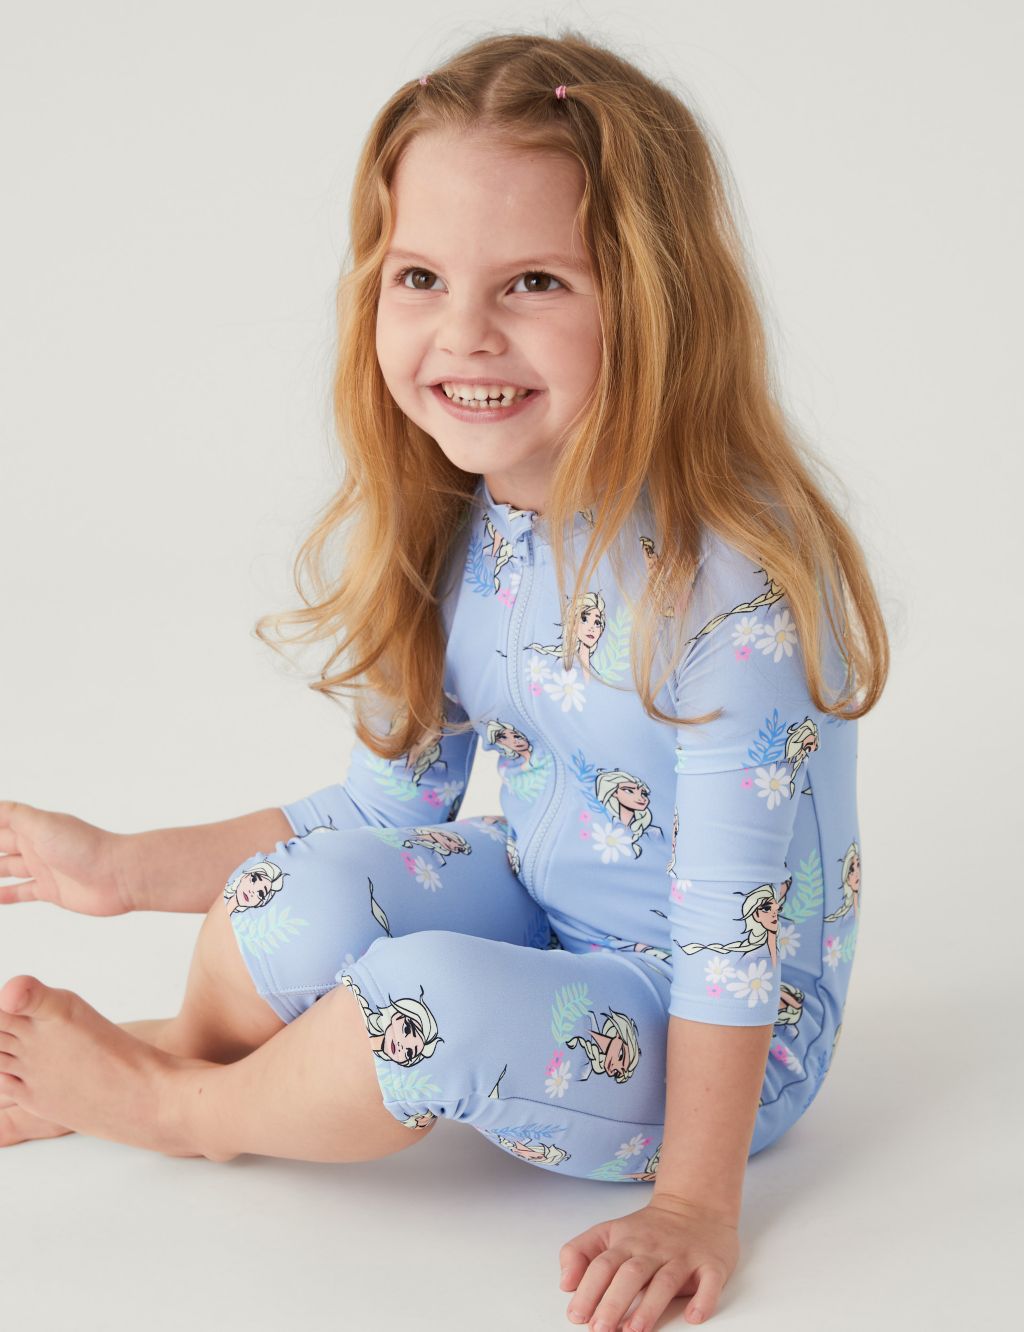 Official Disney Frozen Clothes, Girls Clothing & PJs